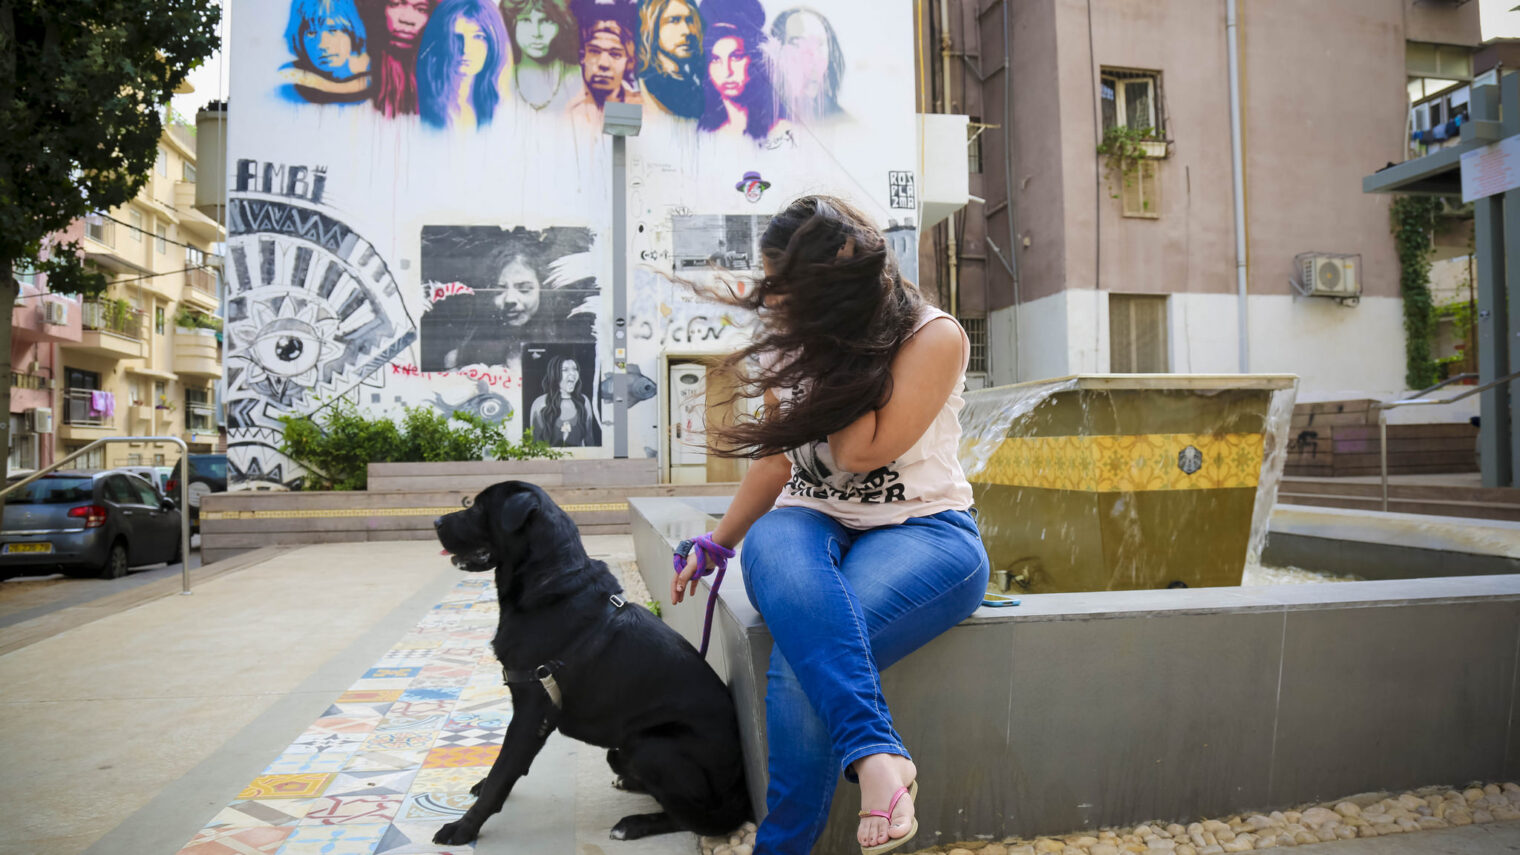 It’s all about the dogs in Florentin. Photo by Guy Yechiely, Tel Aviv Municipality